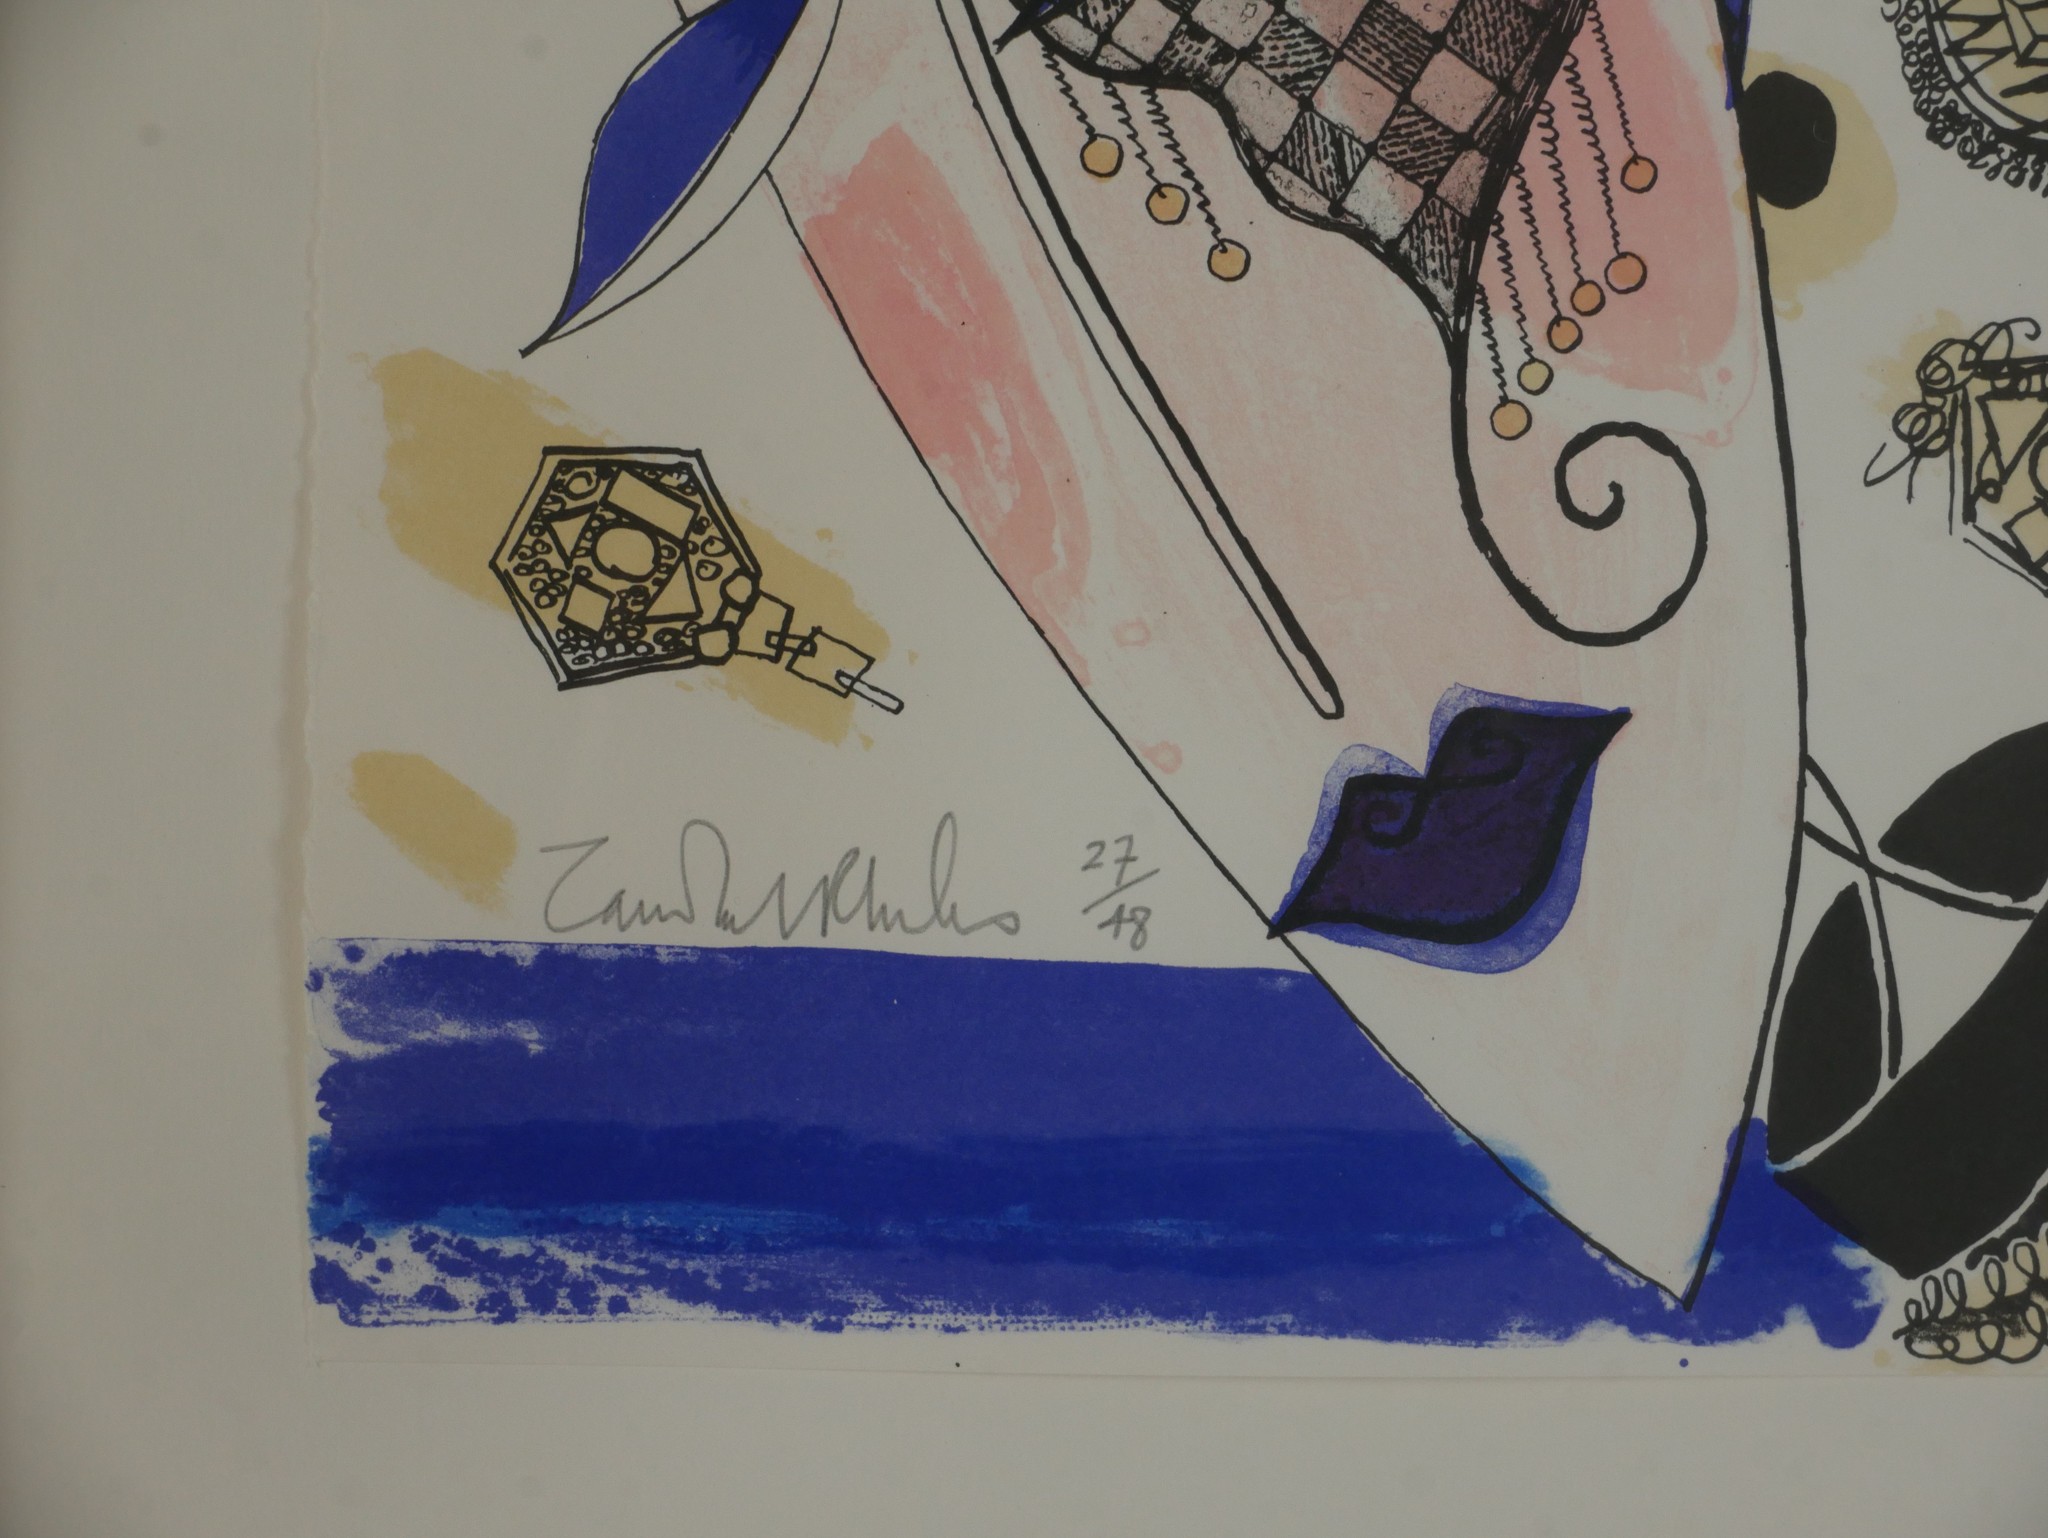 Zandra Rhodes, Head With Scribbled Jewels (from the Portfolio 'Artists Choice' 1987), 1987 - Image 4 of 5